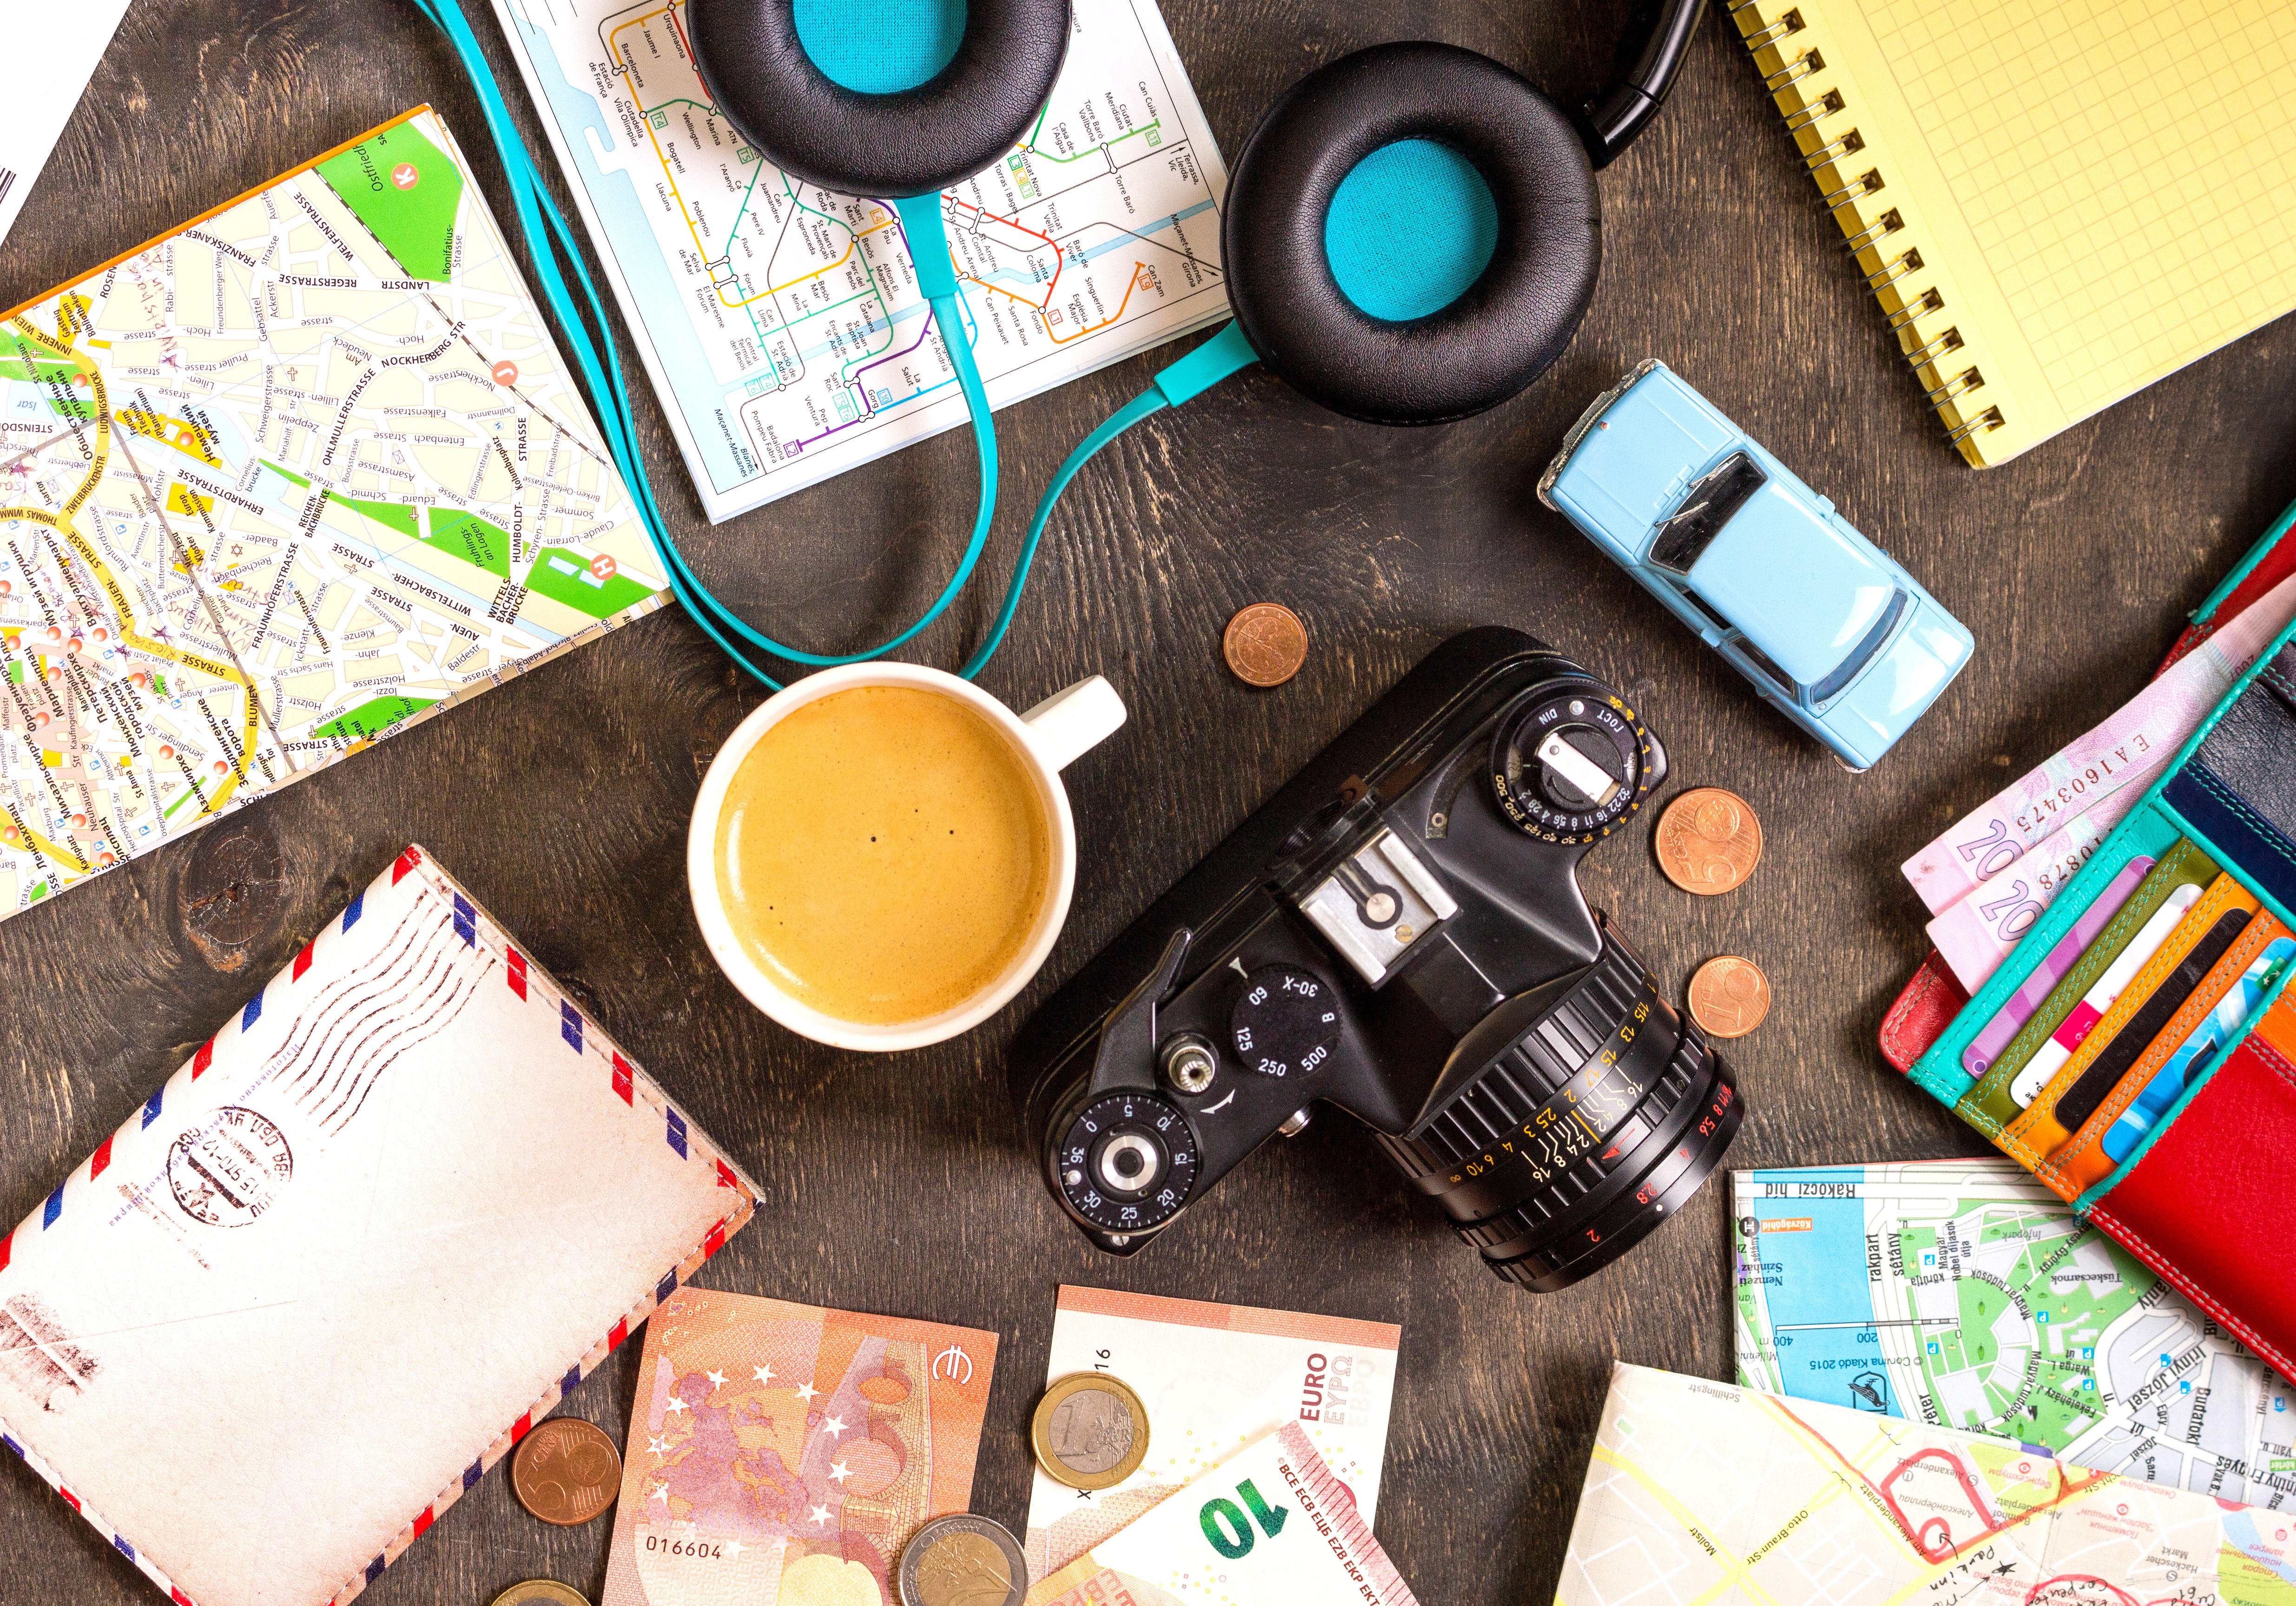 A collection of travel essentials on a black desk - camera, touristic maps, passport, toy car, coffee, headphones, wallet with credit cards, euro banknotes, and coins.